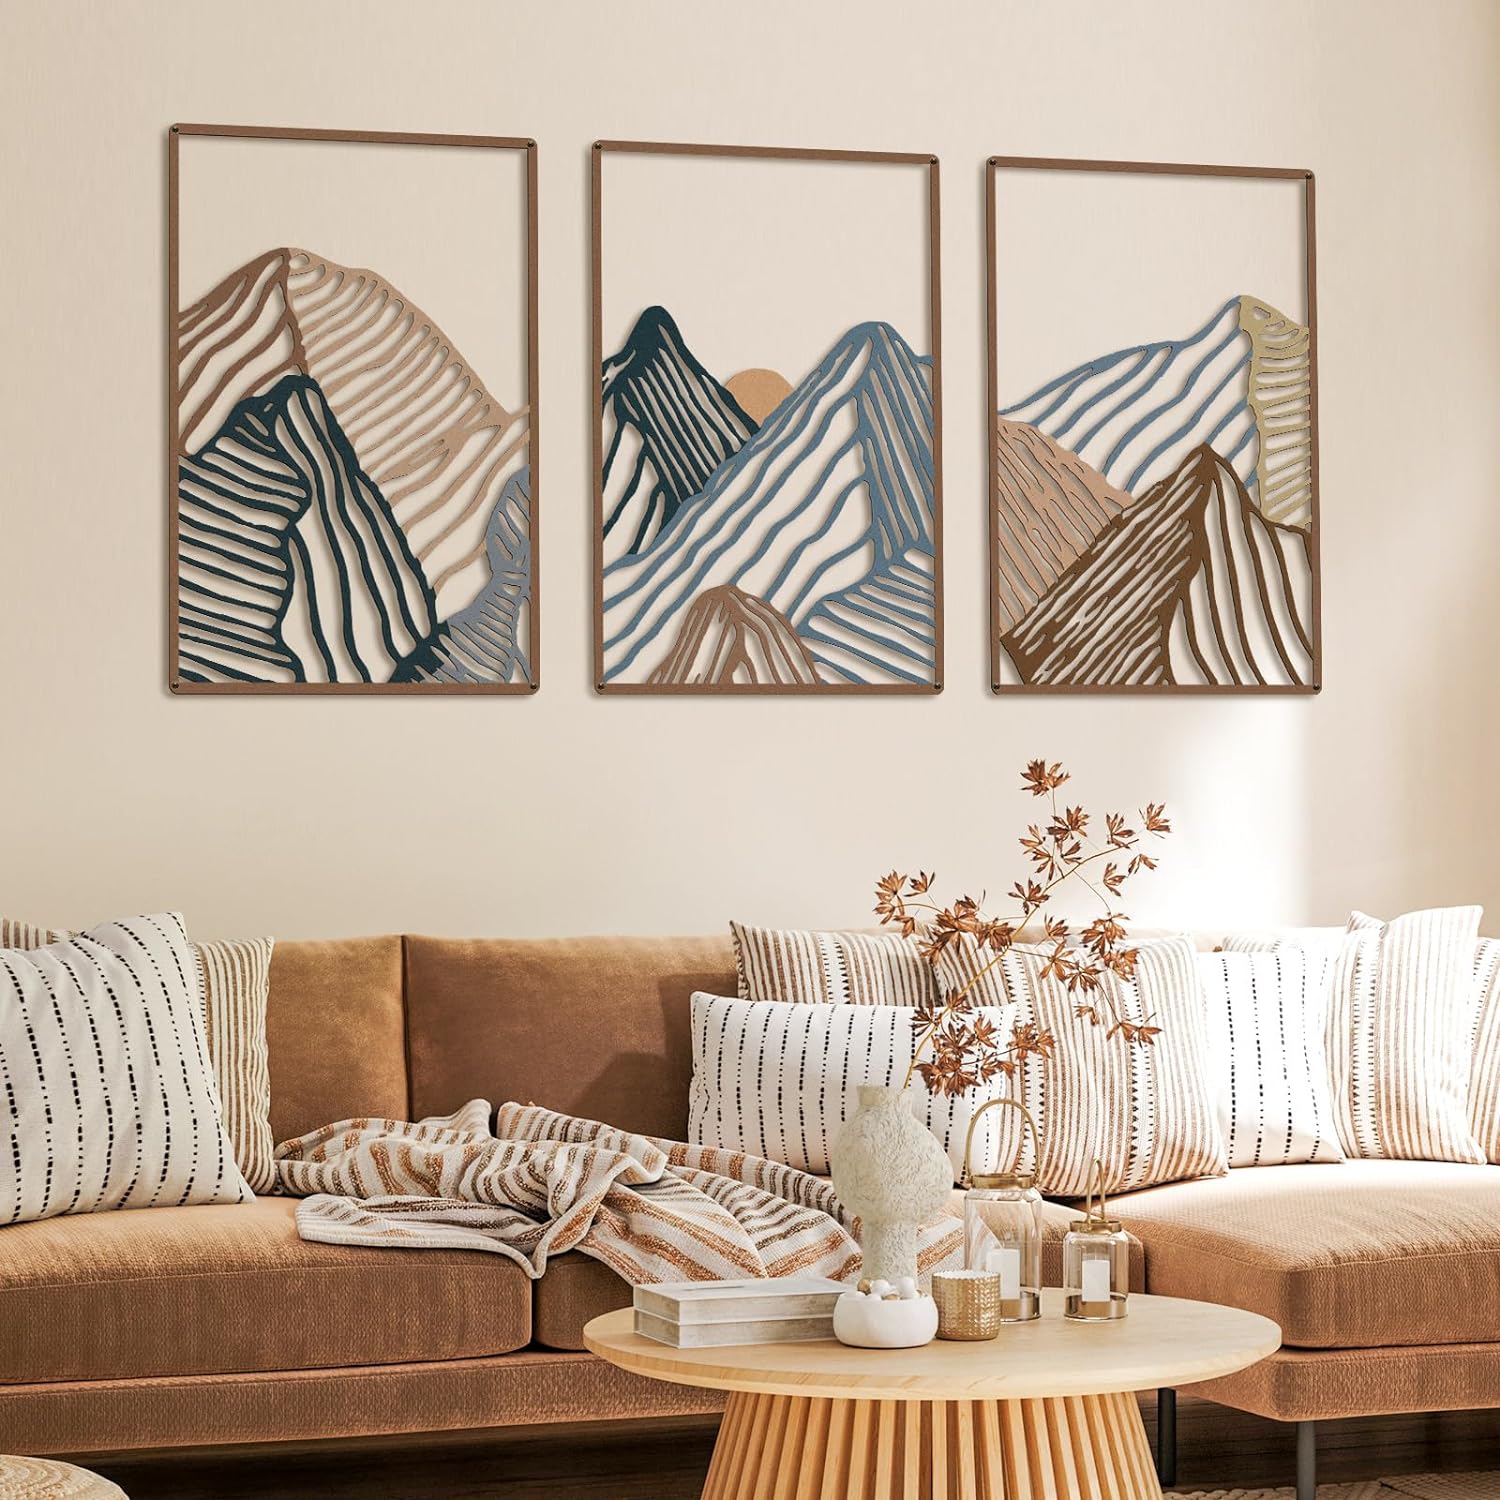 Peryiter 3 Pcs Mountain Metal Wall Art Mountain Line Wall Decor Abstract Minimalist Wall Art Rustic Nature Wall Decor for Home Bathroom Living Room(Colorful, Soft Style)